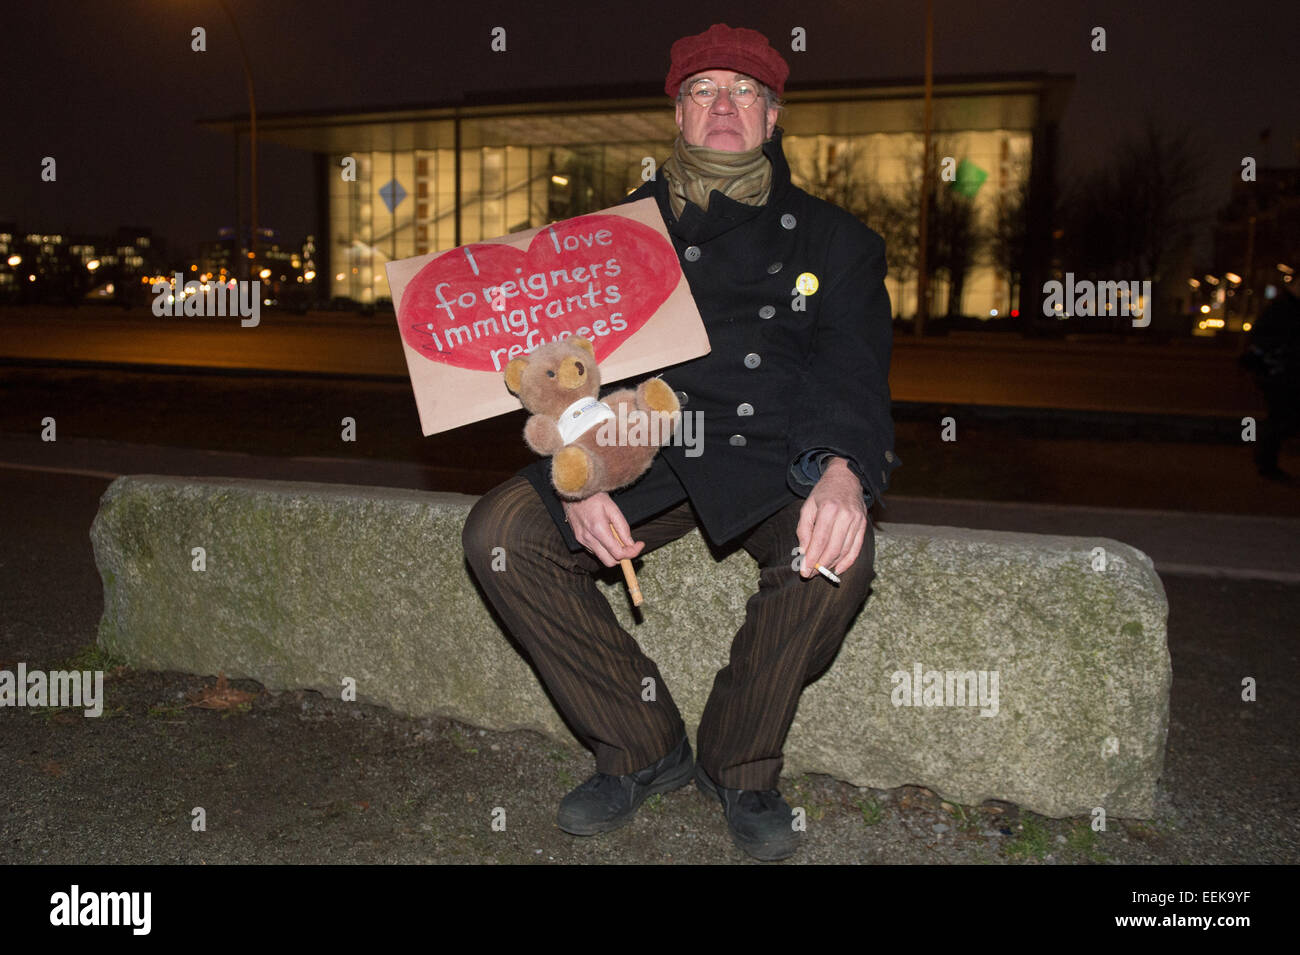 Berlin, Germany. 19th Jan, 2015. A counter-demonstrator protests against the Islam-critical movement 'Baergida' (Berliner Patriots against the Islamization of the West) with the slogan 'acting together against racist agitation and social exclusion' at the federal chancellery in Berlin, Germany, 19 January 2015. Photo: MAURIZIO GAMBARINI/dpa/Alamy Live News Stock Photo